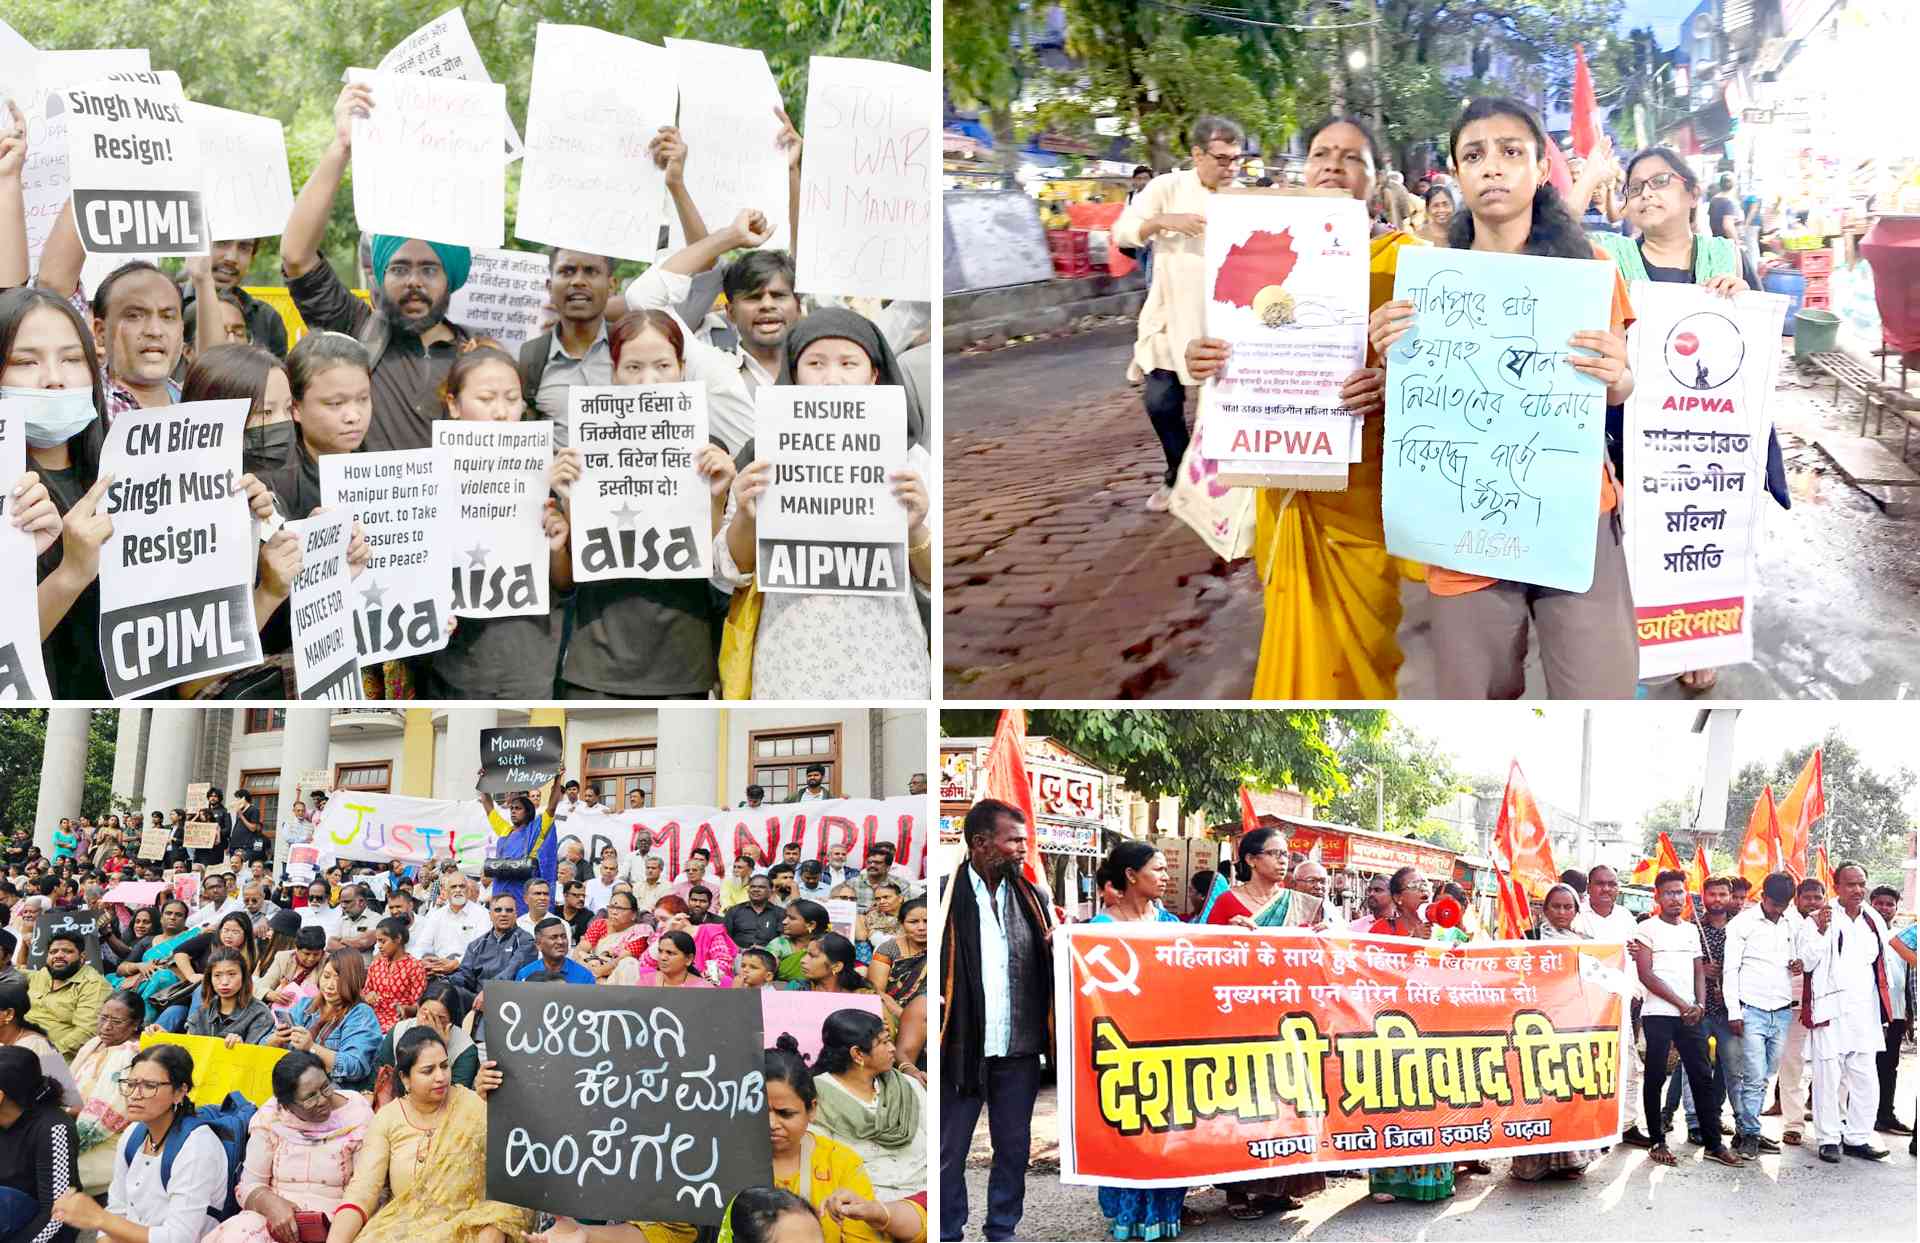 Country-wide Protest Against Sexual Assault on Kuki Women